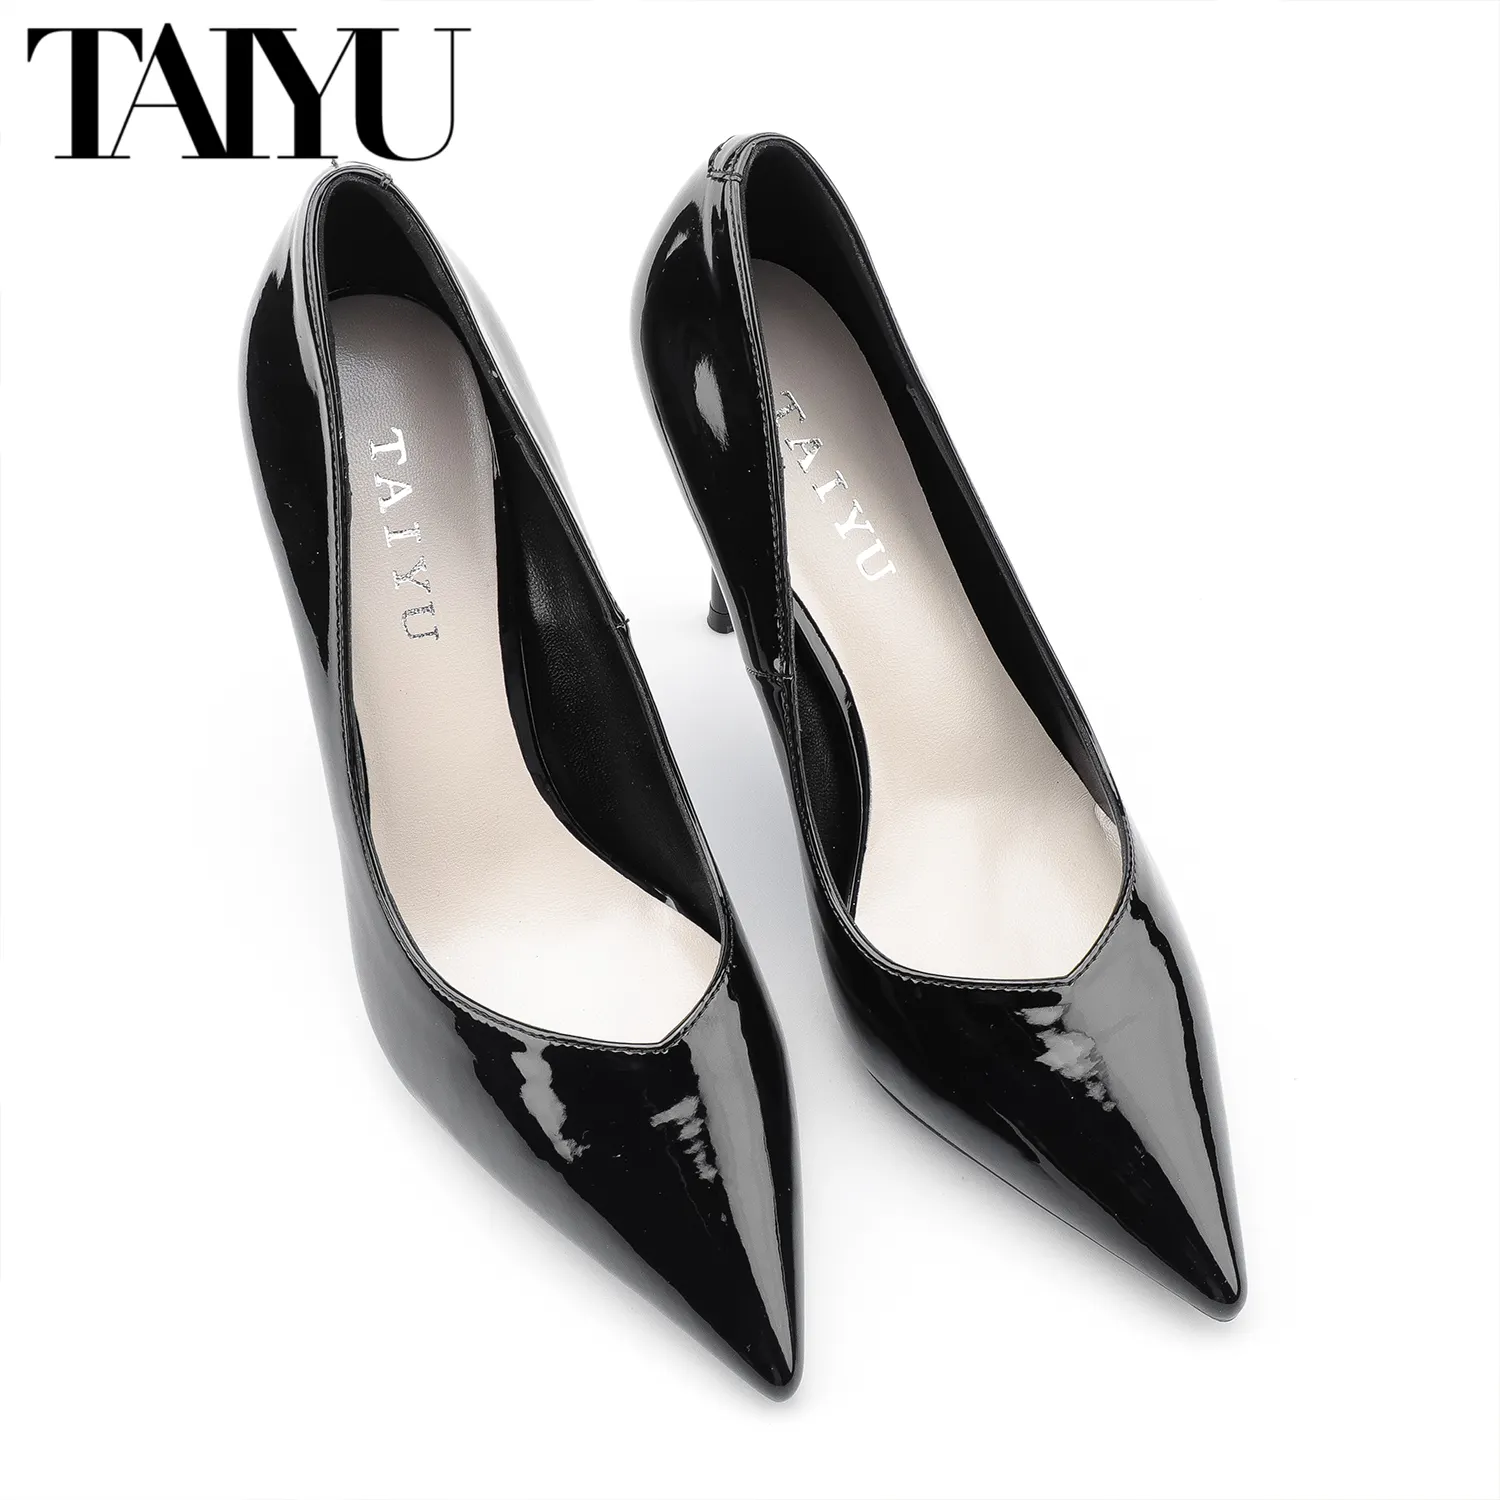 TAIYU High Quality Pumps Classic Patent Leather Women's High Heels Pointy Toe Stilettos Formal black Shoes